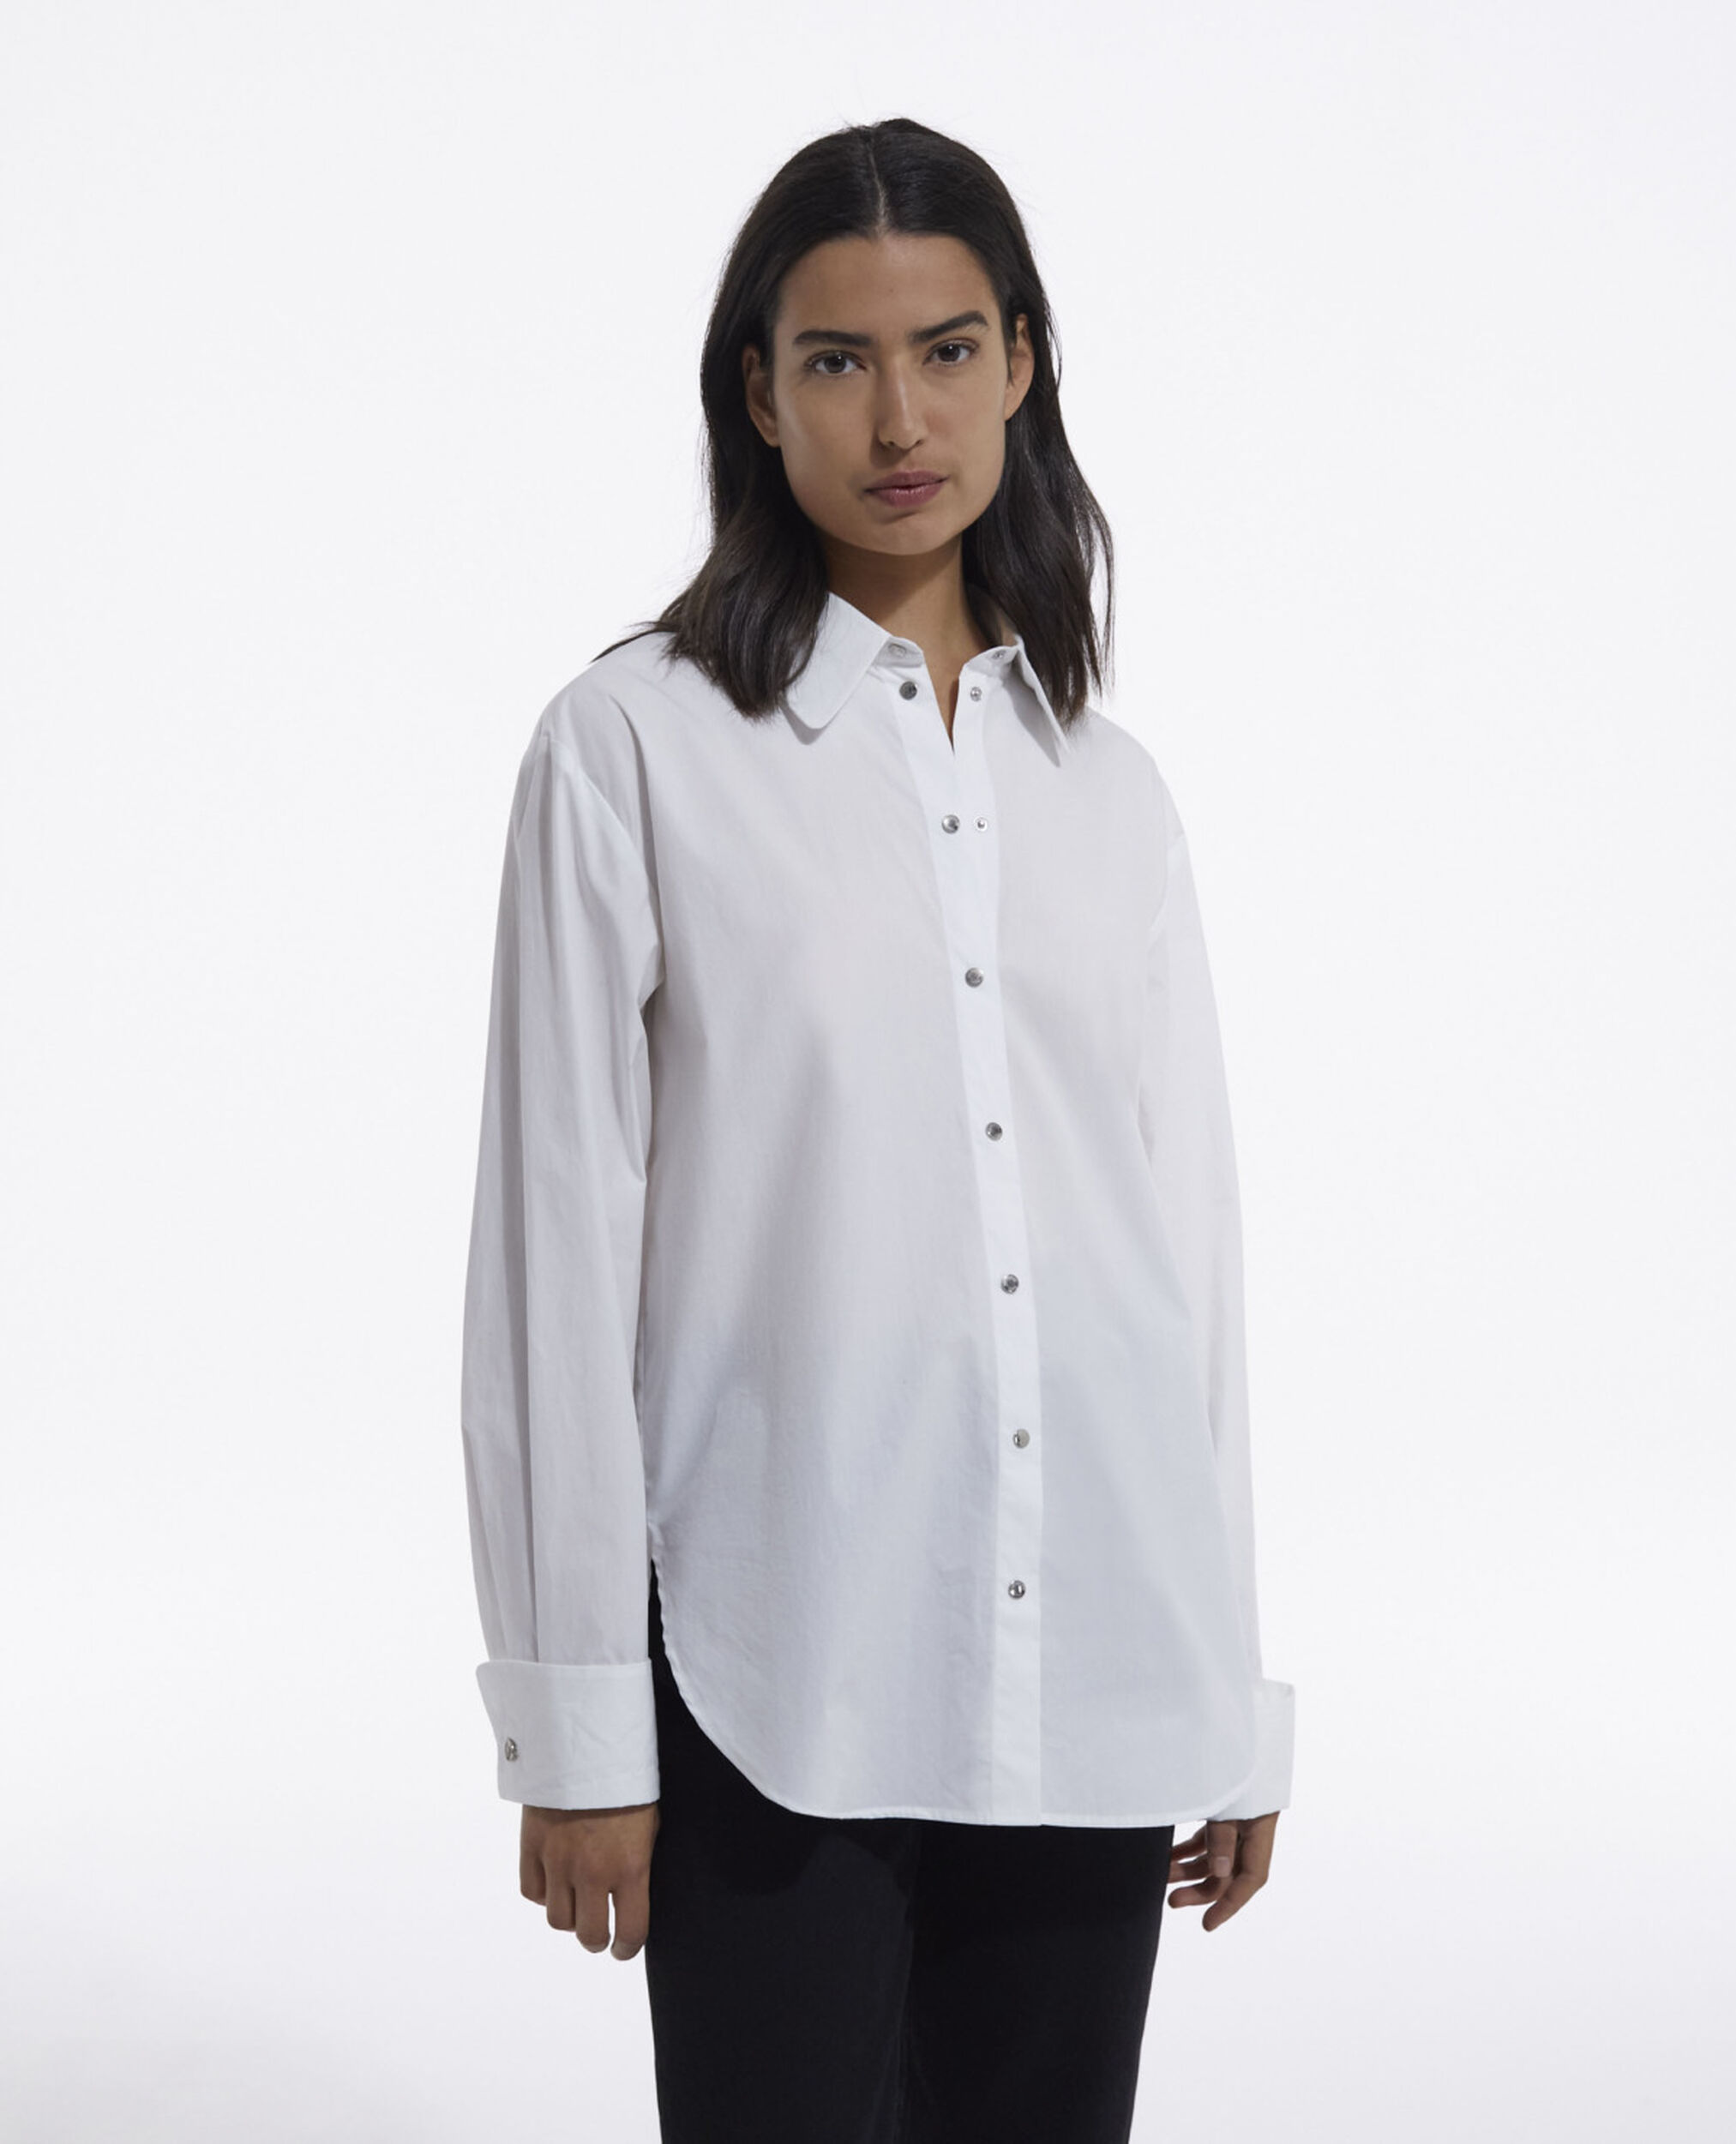 Chemise blanche loose à boutons-pression, WHITE, hi-res image number null